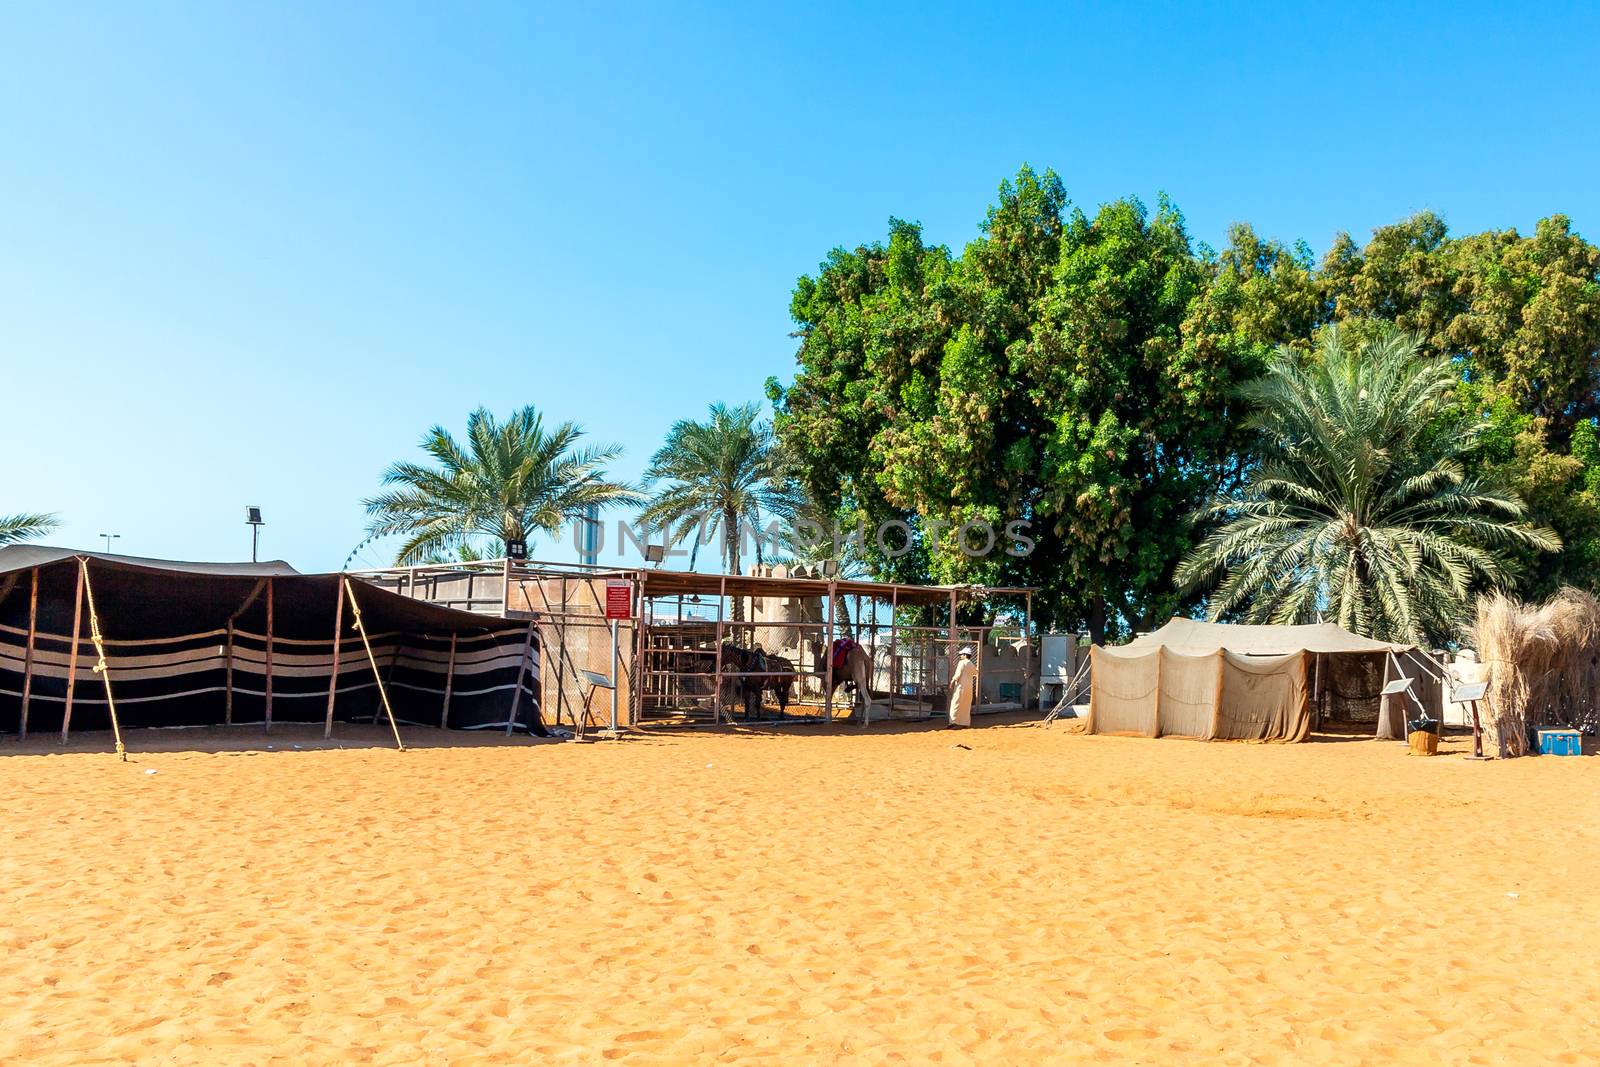 Decorative elements of urban improvement in the resort town - bed made of natural materials under a canopy, Heritage Village, Abu Dhabi by galsand